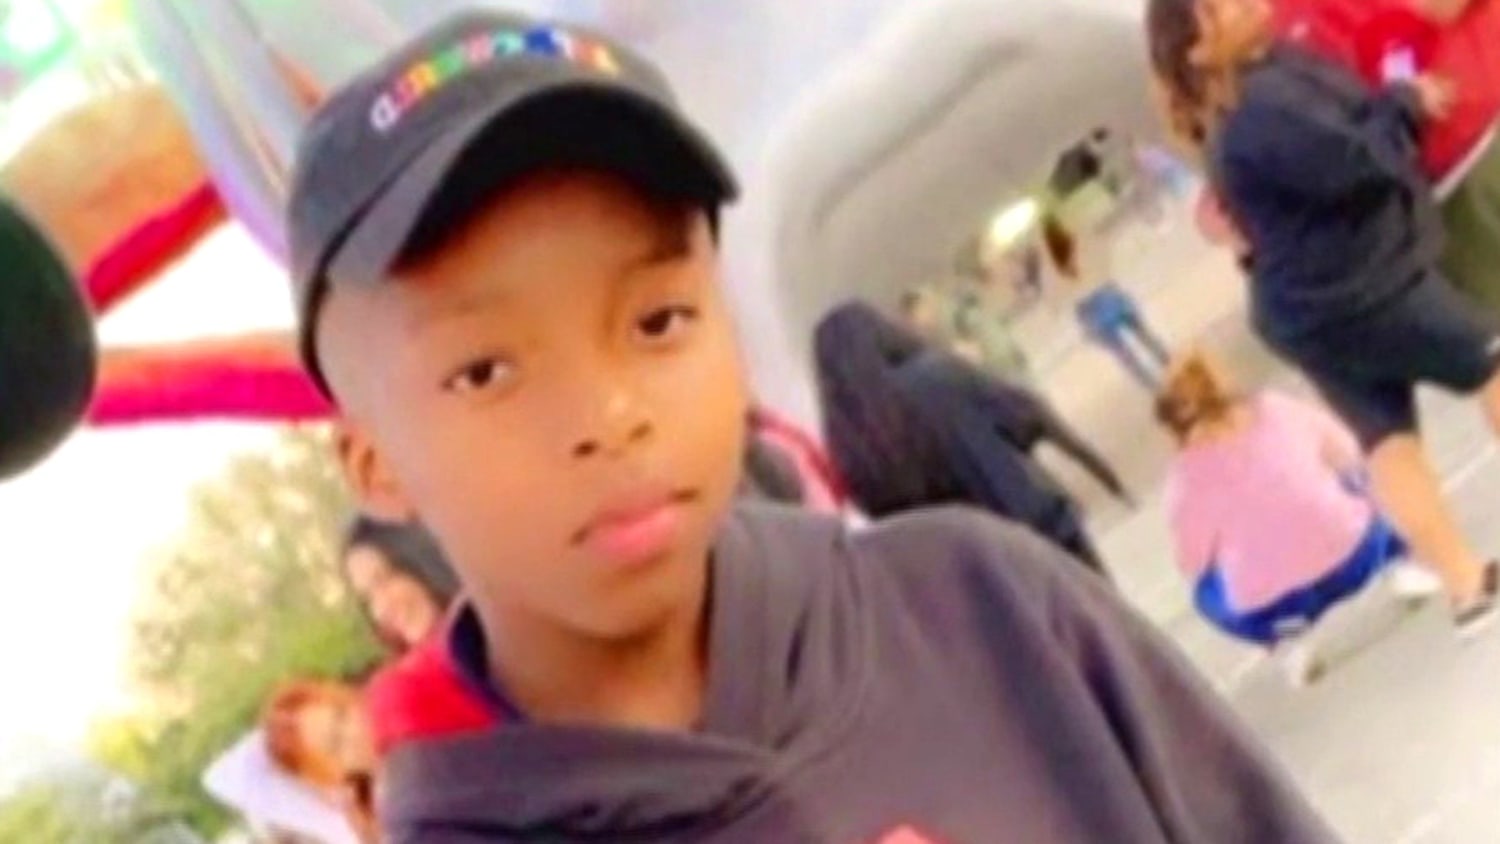 9-Year-Old Boy Who Was Injured at Astroworld Festival Dies - The New York  Times